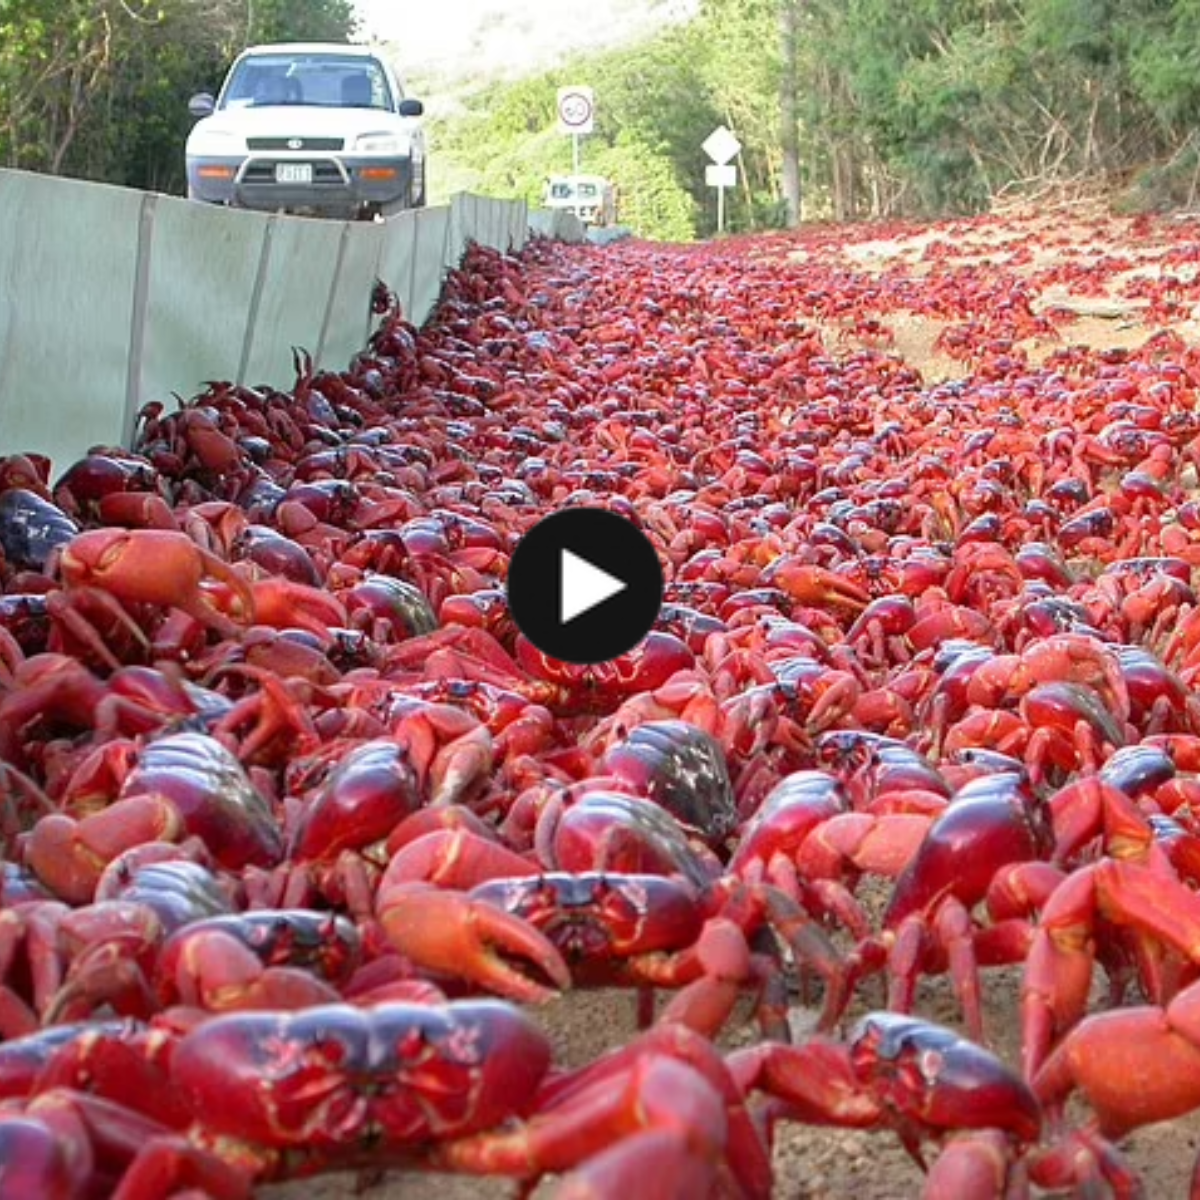 Red crab migration: The fascinating moment 50 million red crustaceans block roads and bridges in Australia